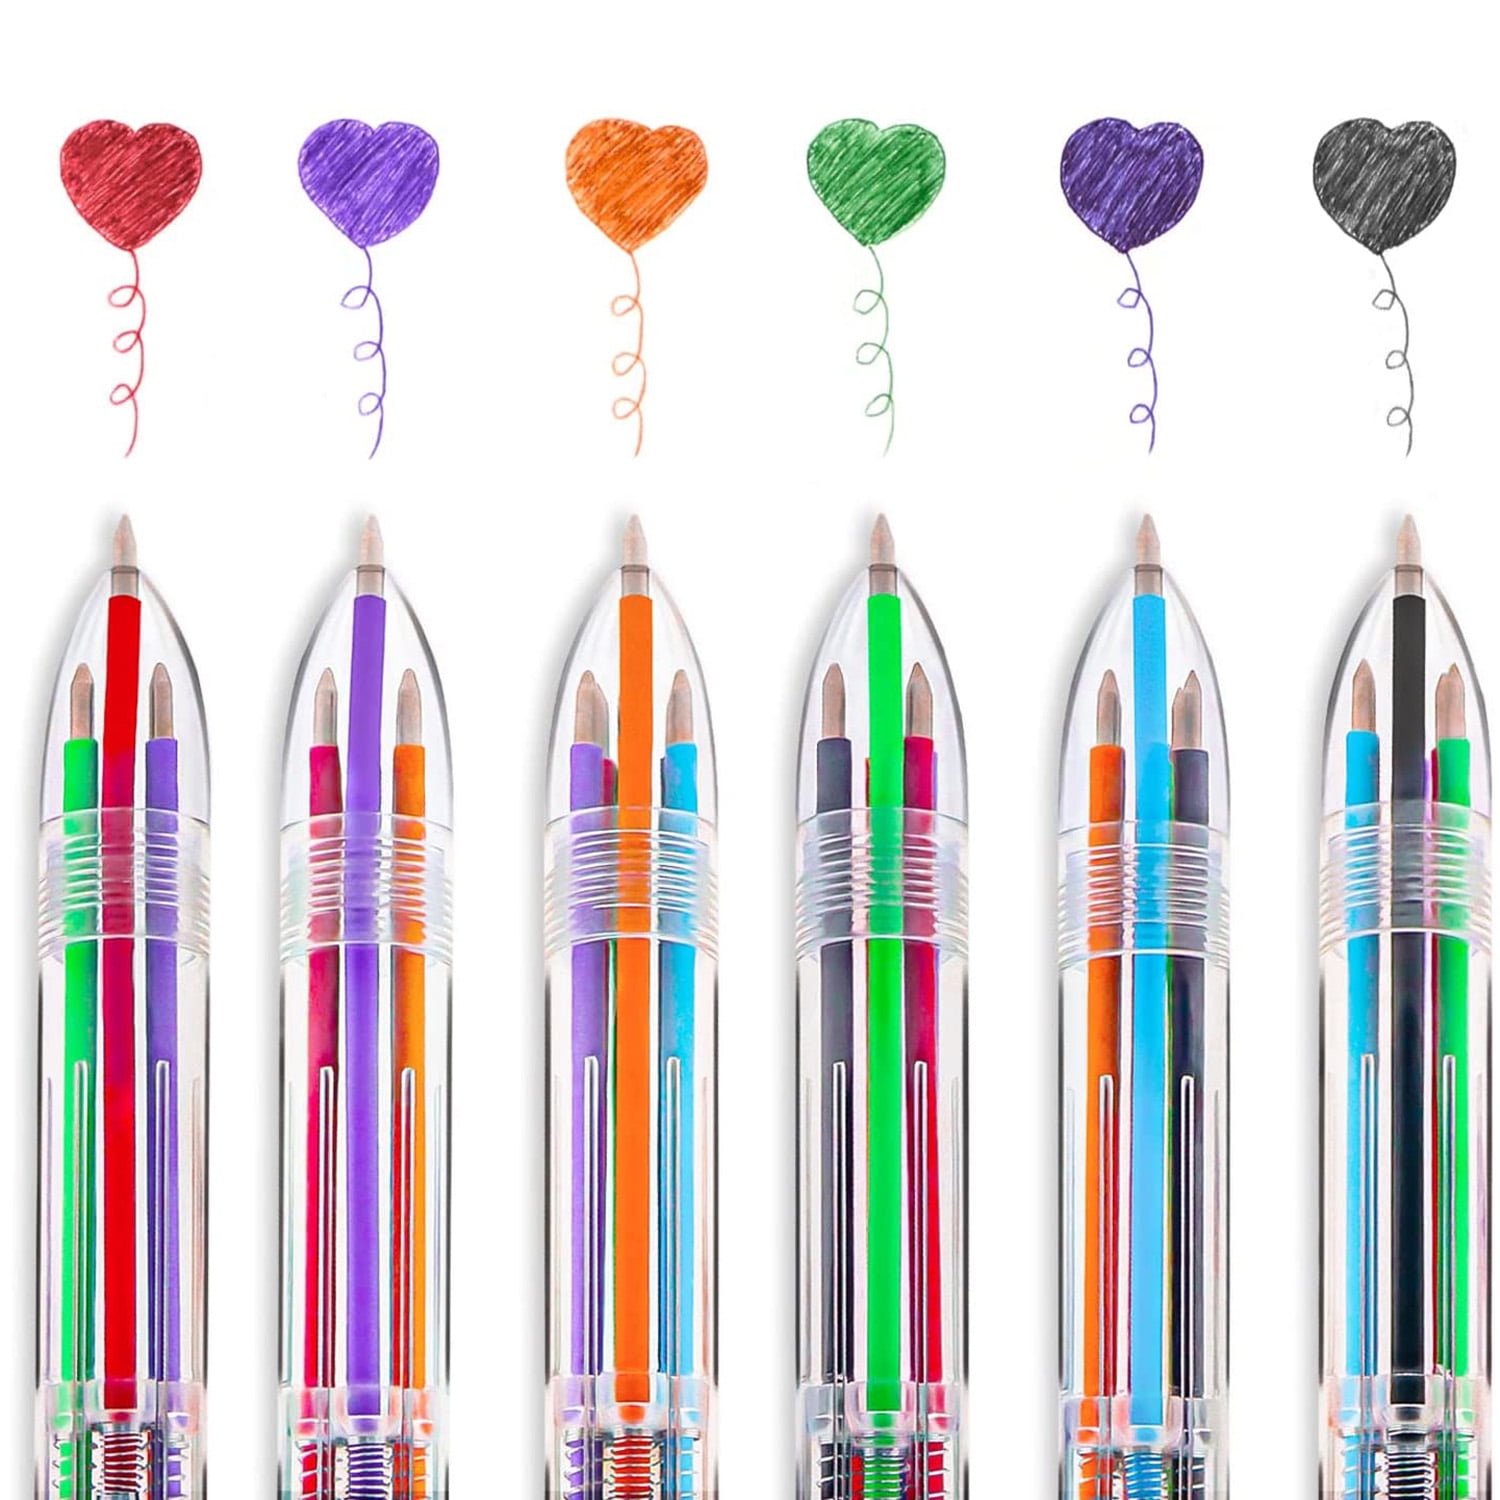 Sikao 6-in-1 Multicolor Pens, 6 Pack Multi Color Pens All in One, Multicolored Pens, Rainbow Pens, Bulk Party Favors, Classro